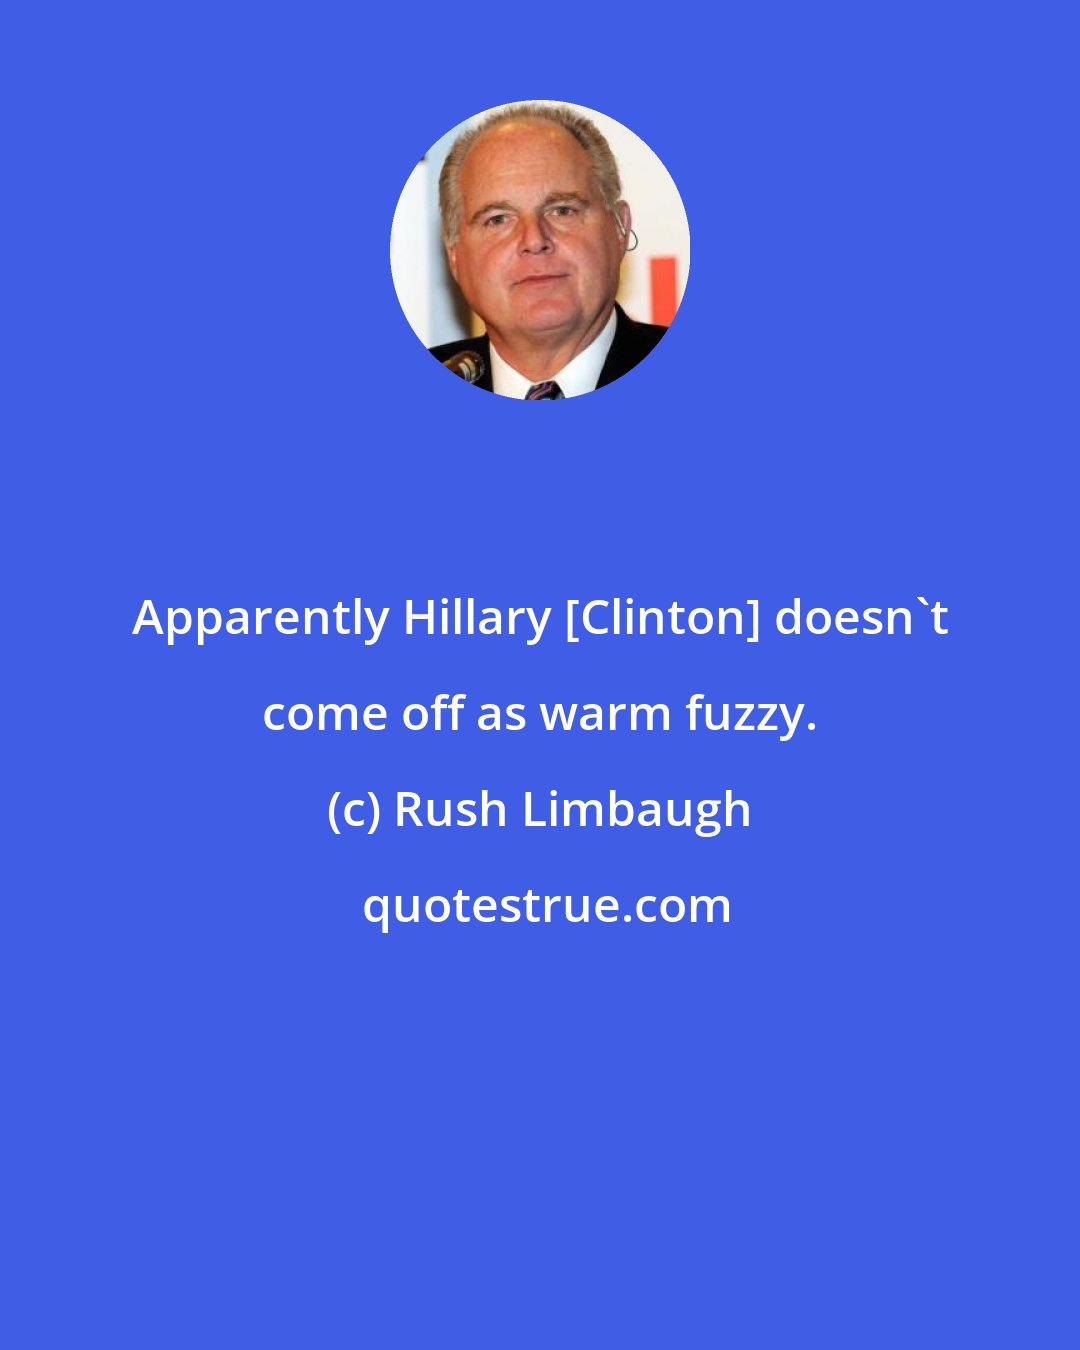 Rush Limbaugh: Apparently Hillary [Clinton] doesn't come off as warm fuzzy.